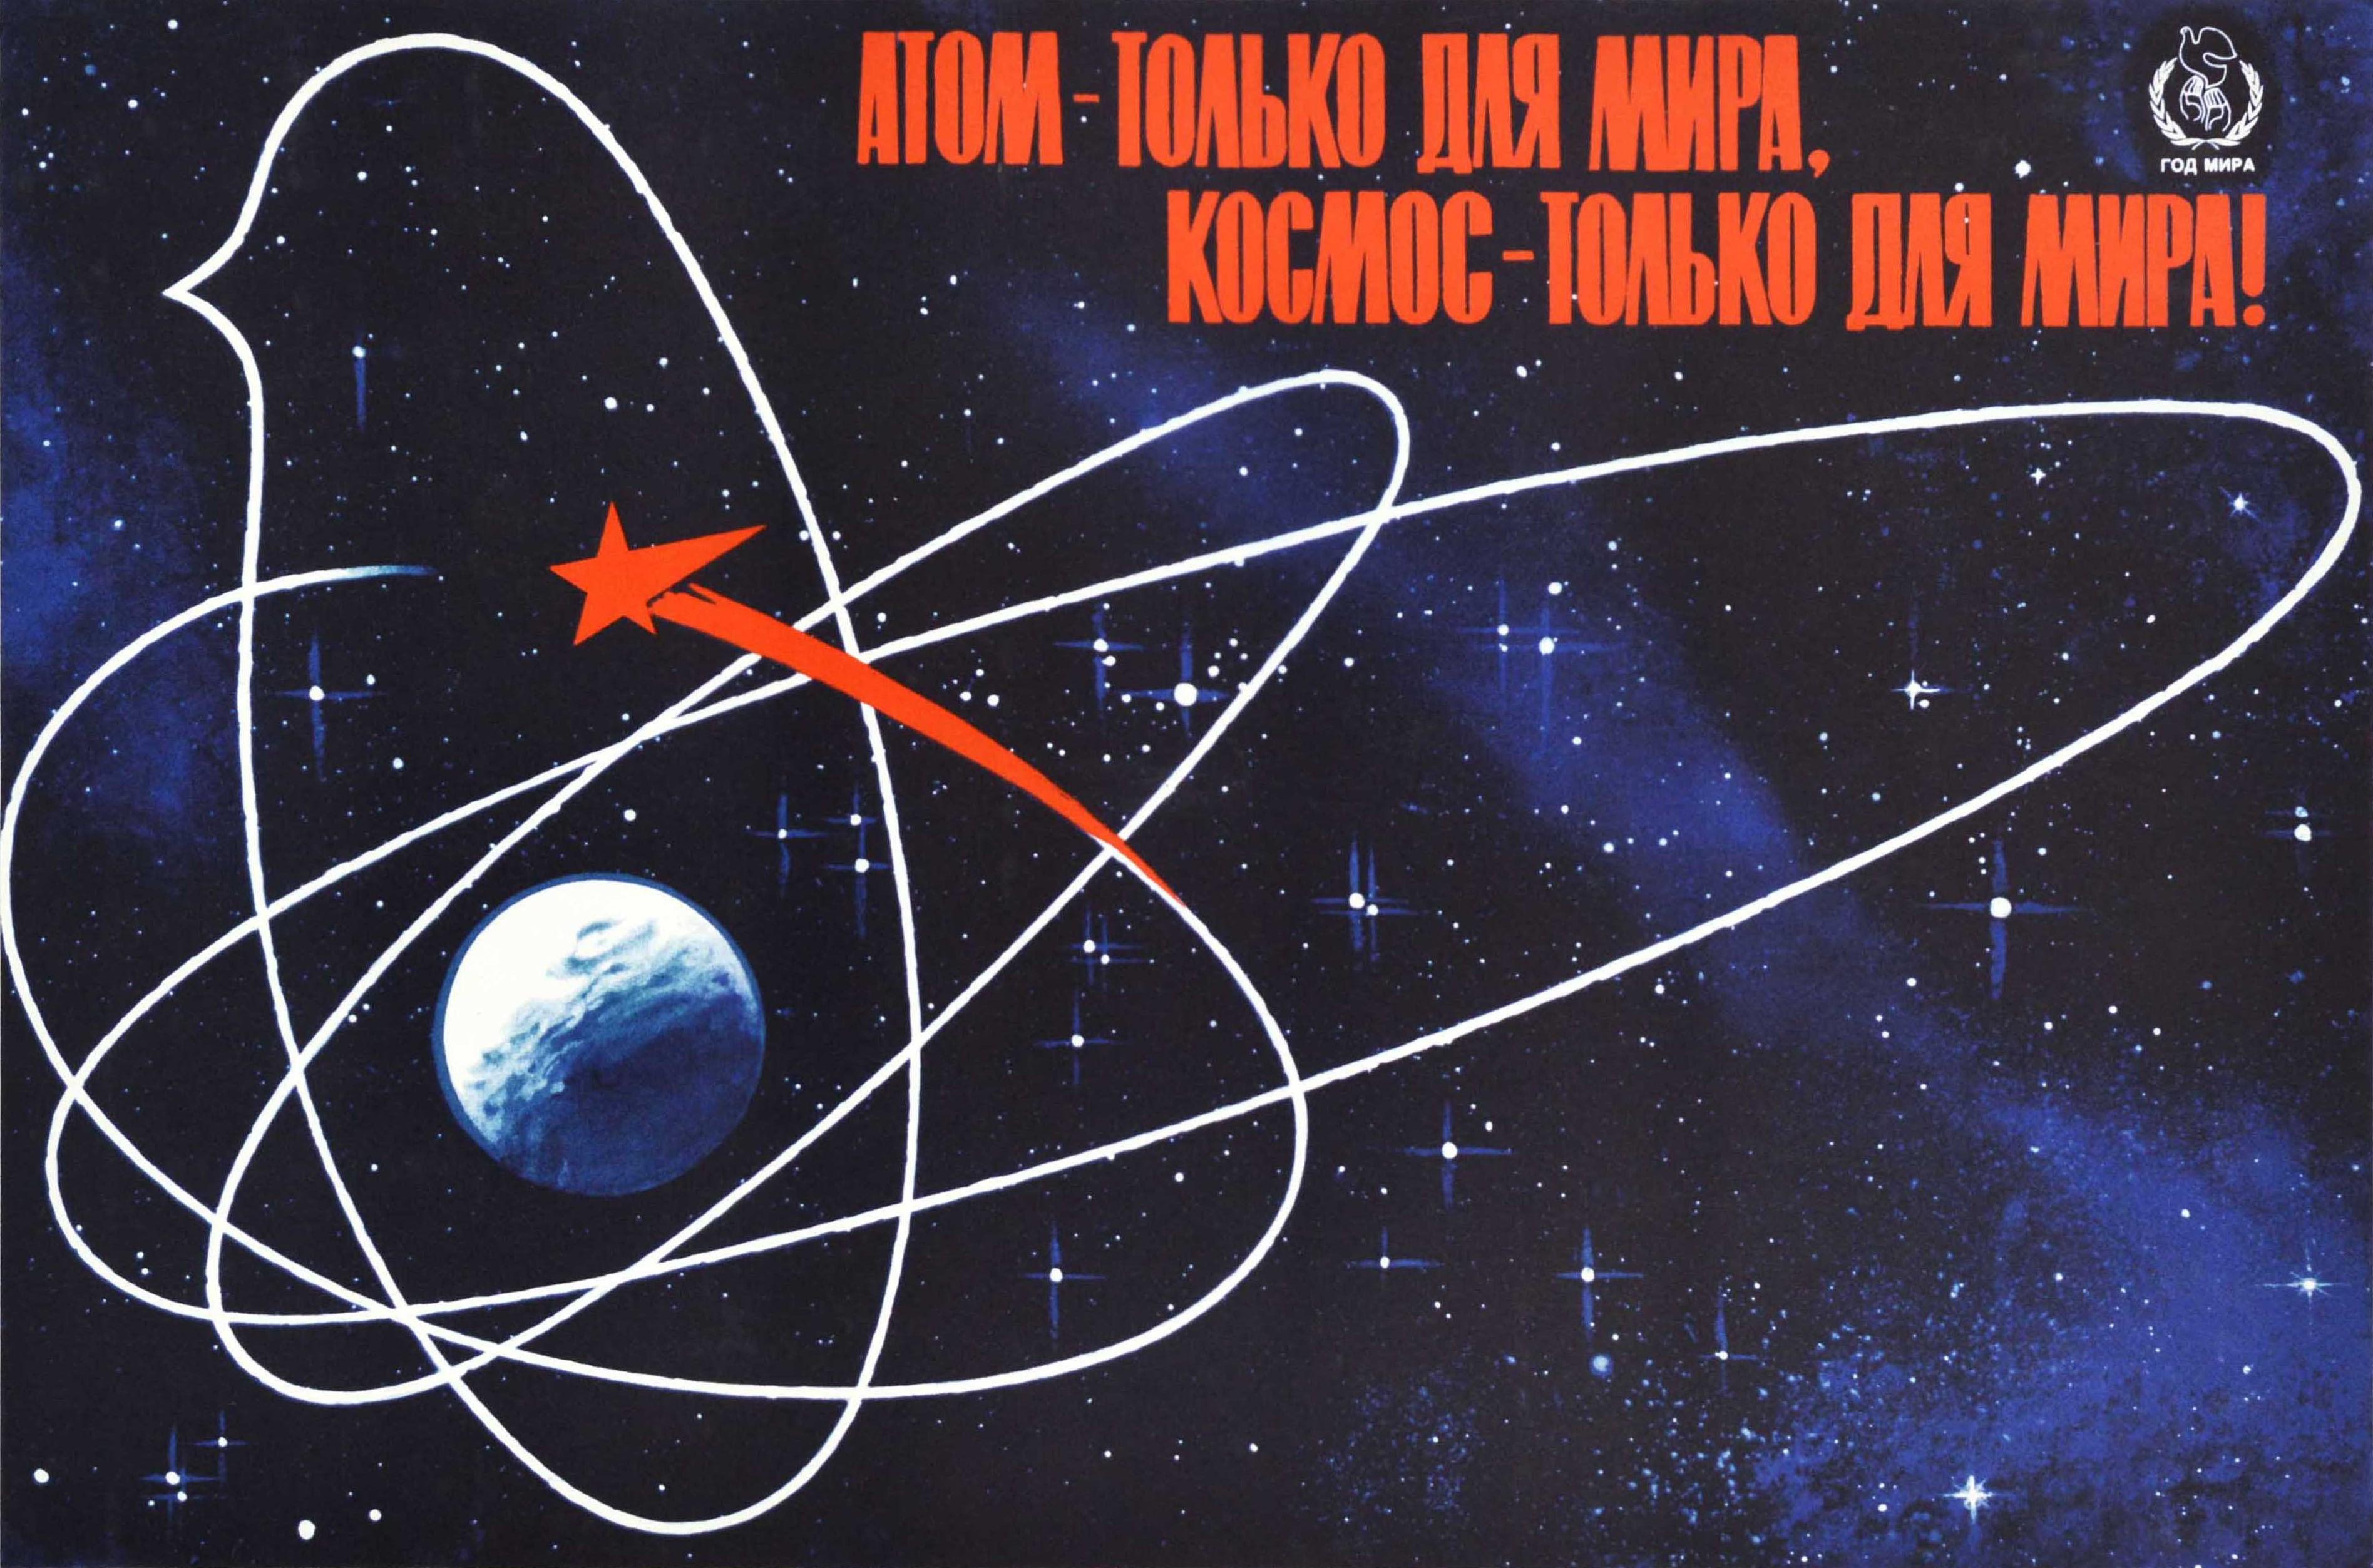 Original vintage USSR propaganda poster - Atom only for peace Space only for peace! - featuring the outline of a white dove of peace formed by a red Soviet star orbiting the world against a starry blue space background, the title in bold red text